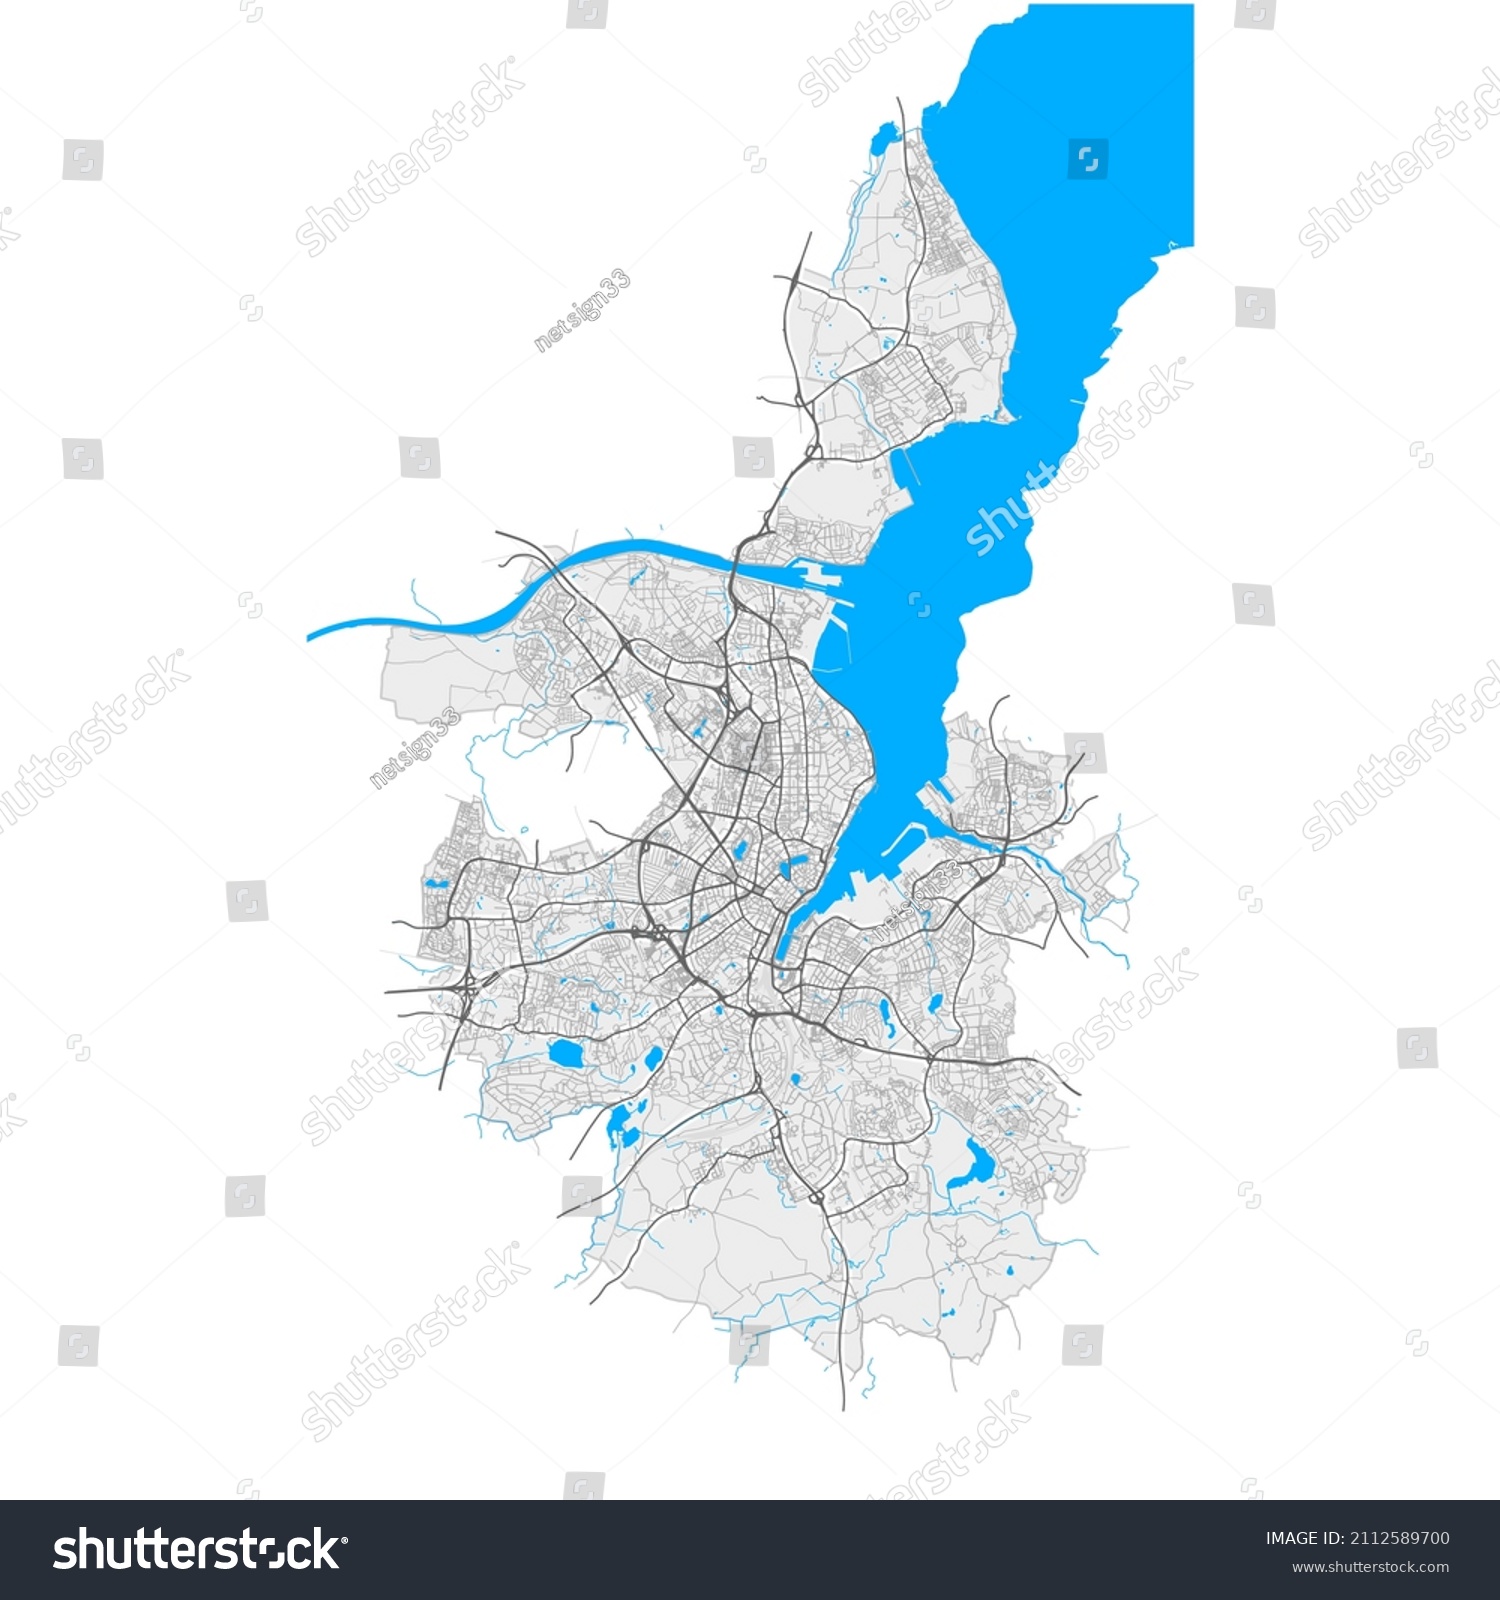 SVG of Kiel, Schleswig-Holstein, Germany high resolution vector map with city boundaries and editable paths. White outlines for main roads. Many detailed paths. Blue shapes and lines for water. svg